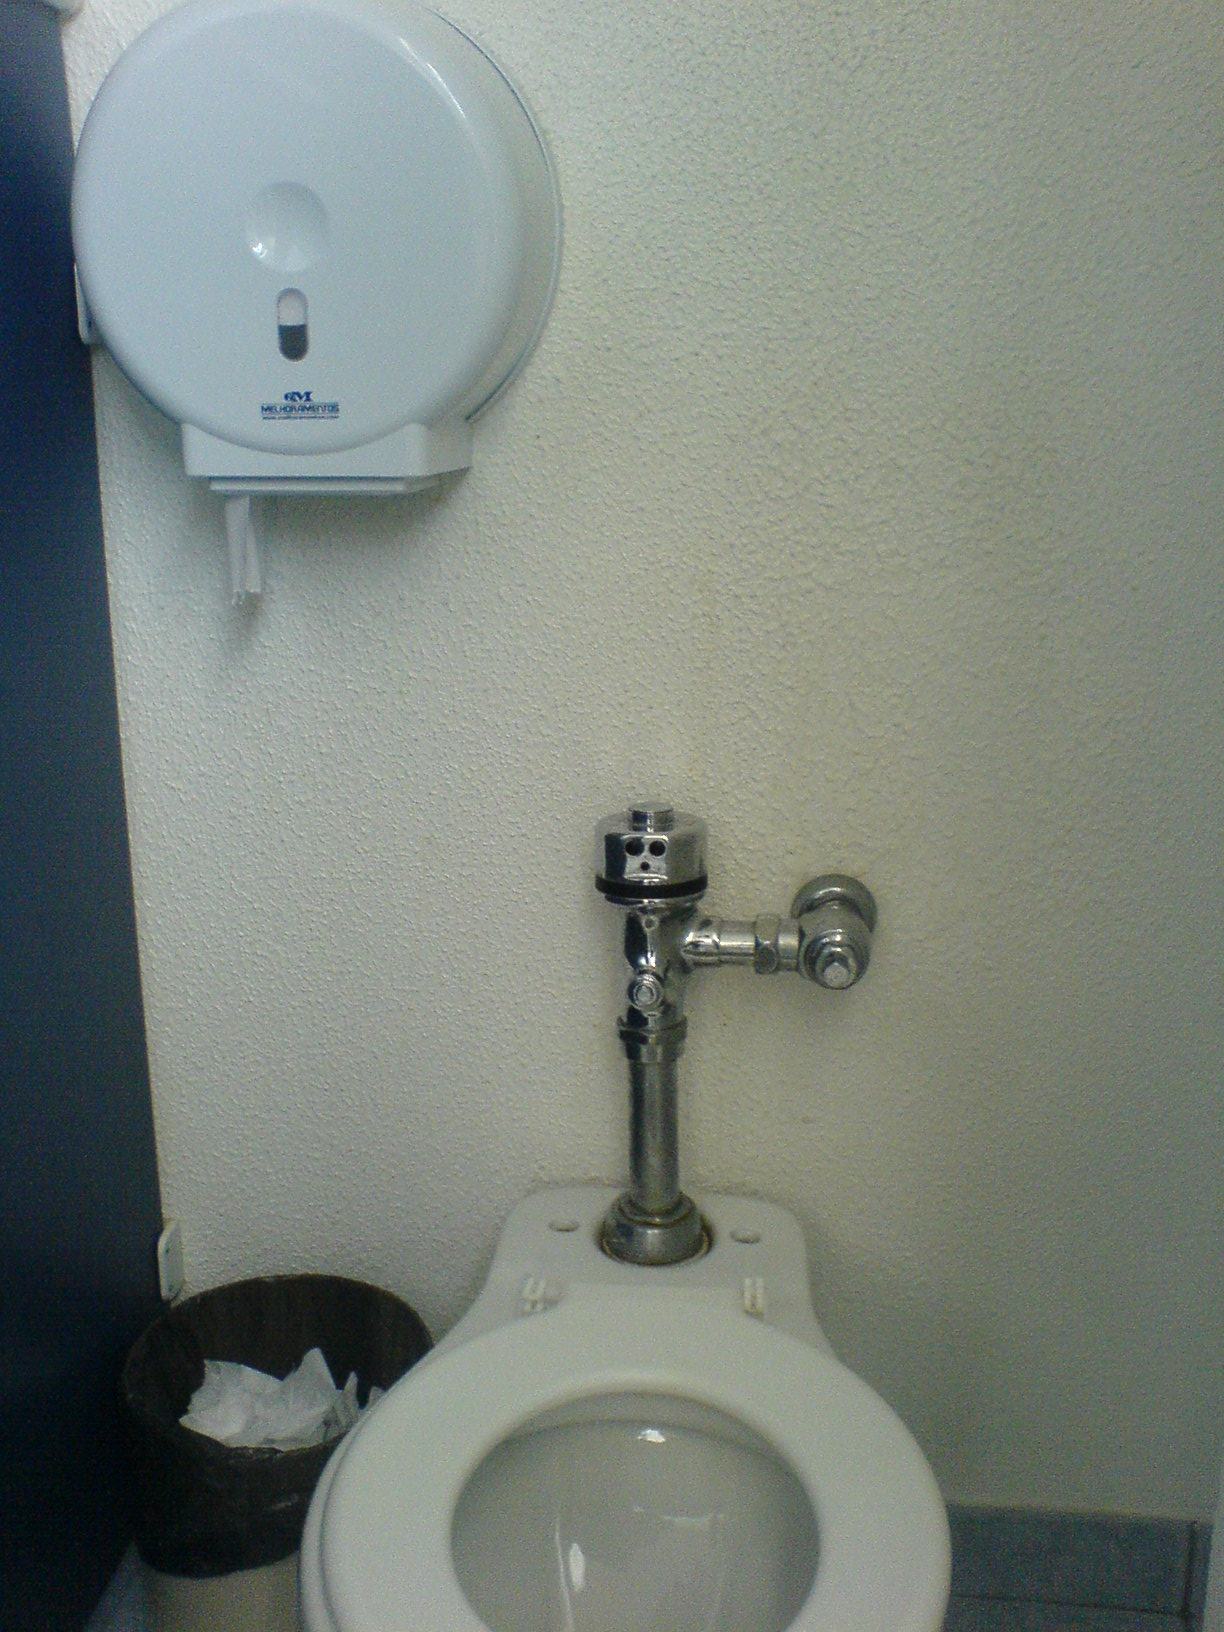 a close up of a toilet with the seat lifted